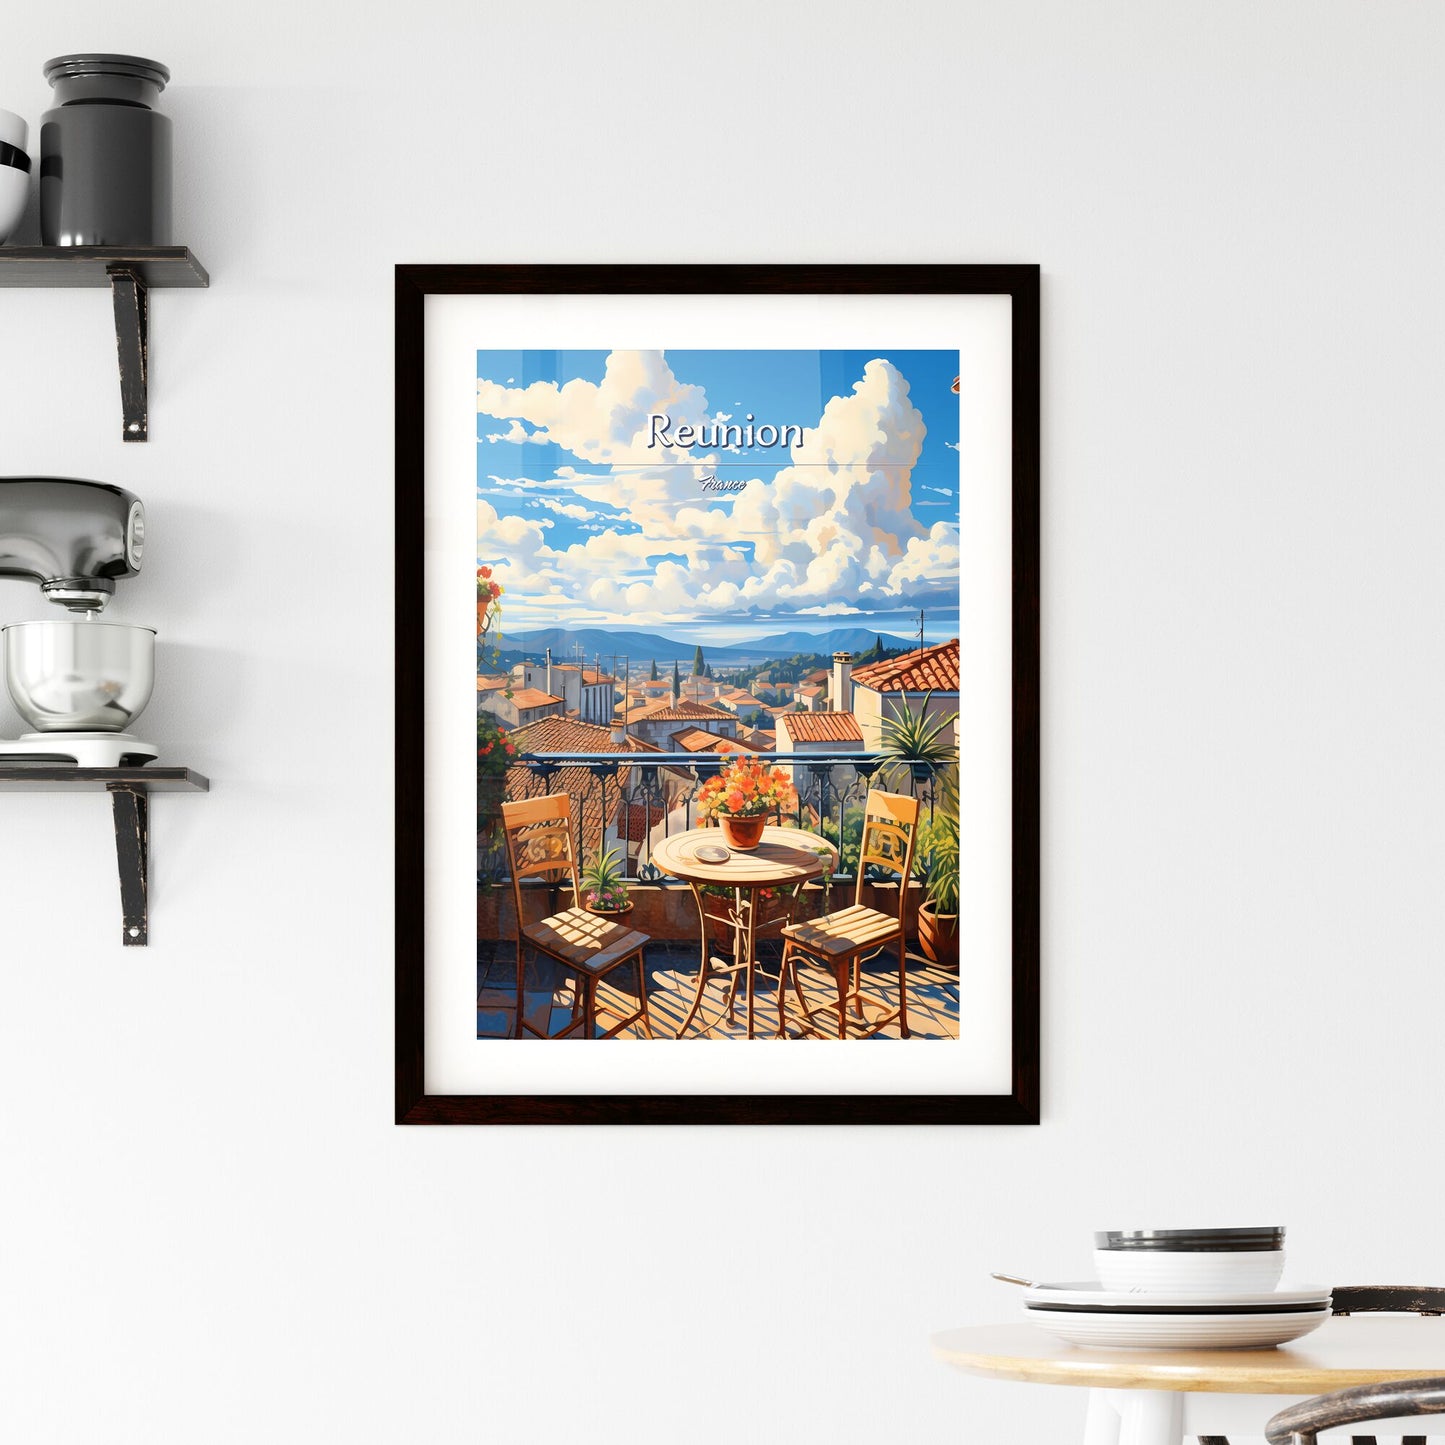 On the roofs of Reunion, France - Art print of a balcony with a table and chairs and a view of the city Default Title